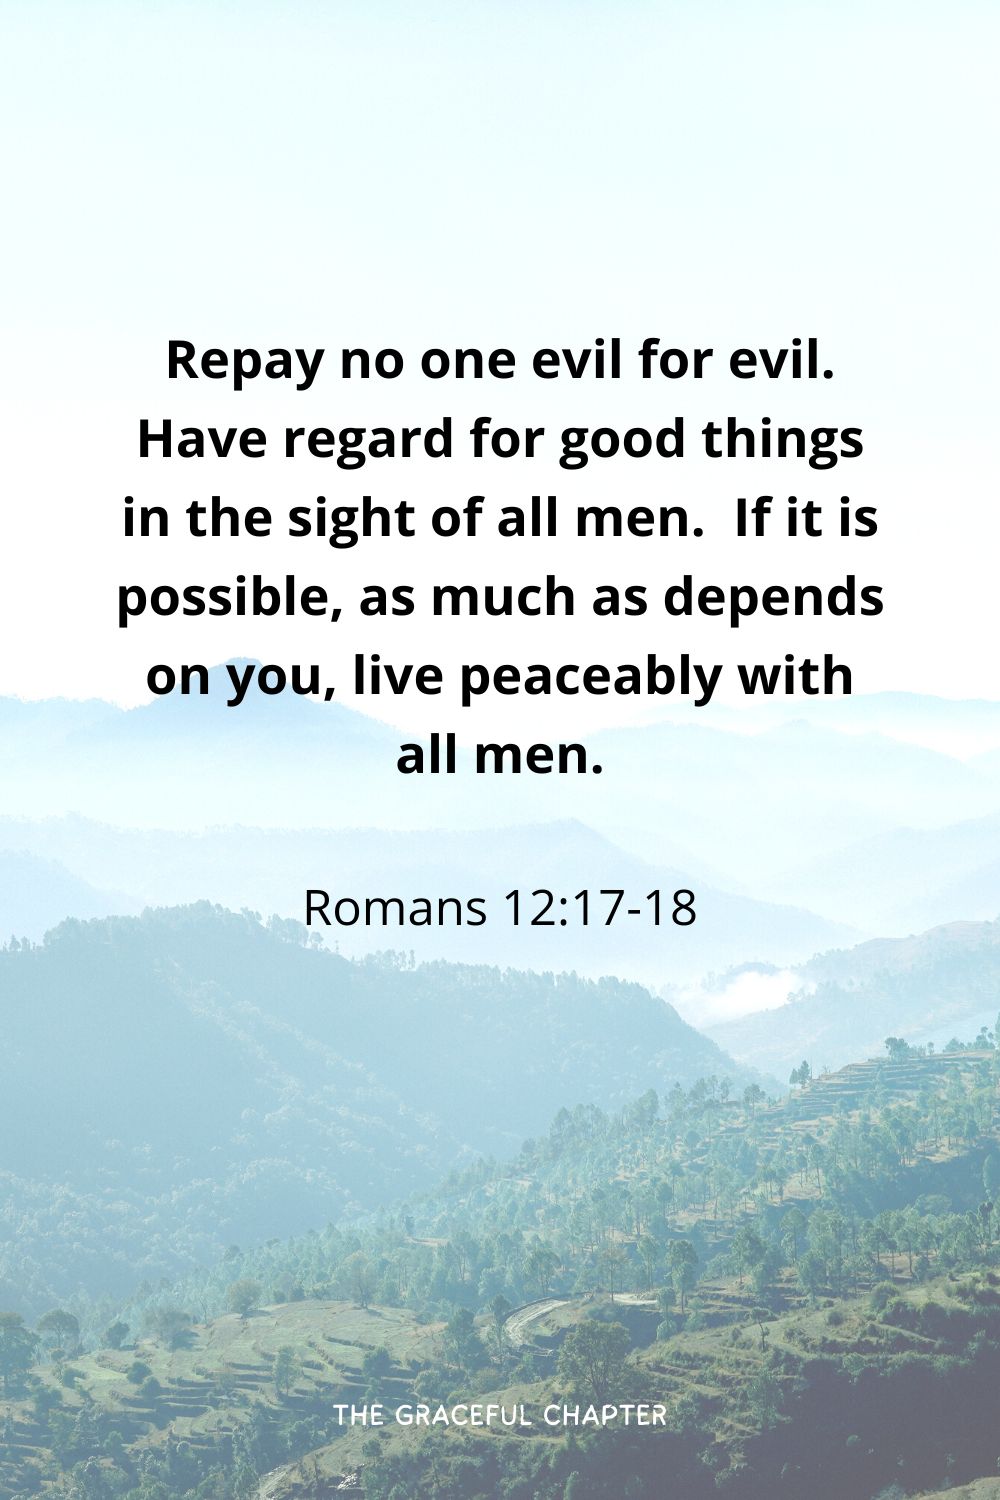 Repay no one evil for evil. Have regard for good things in the sight of all men.  If it is possible, as much as depends on you, live peaceably with all men.